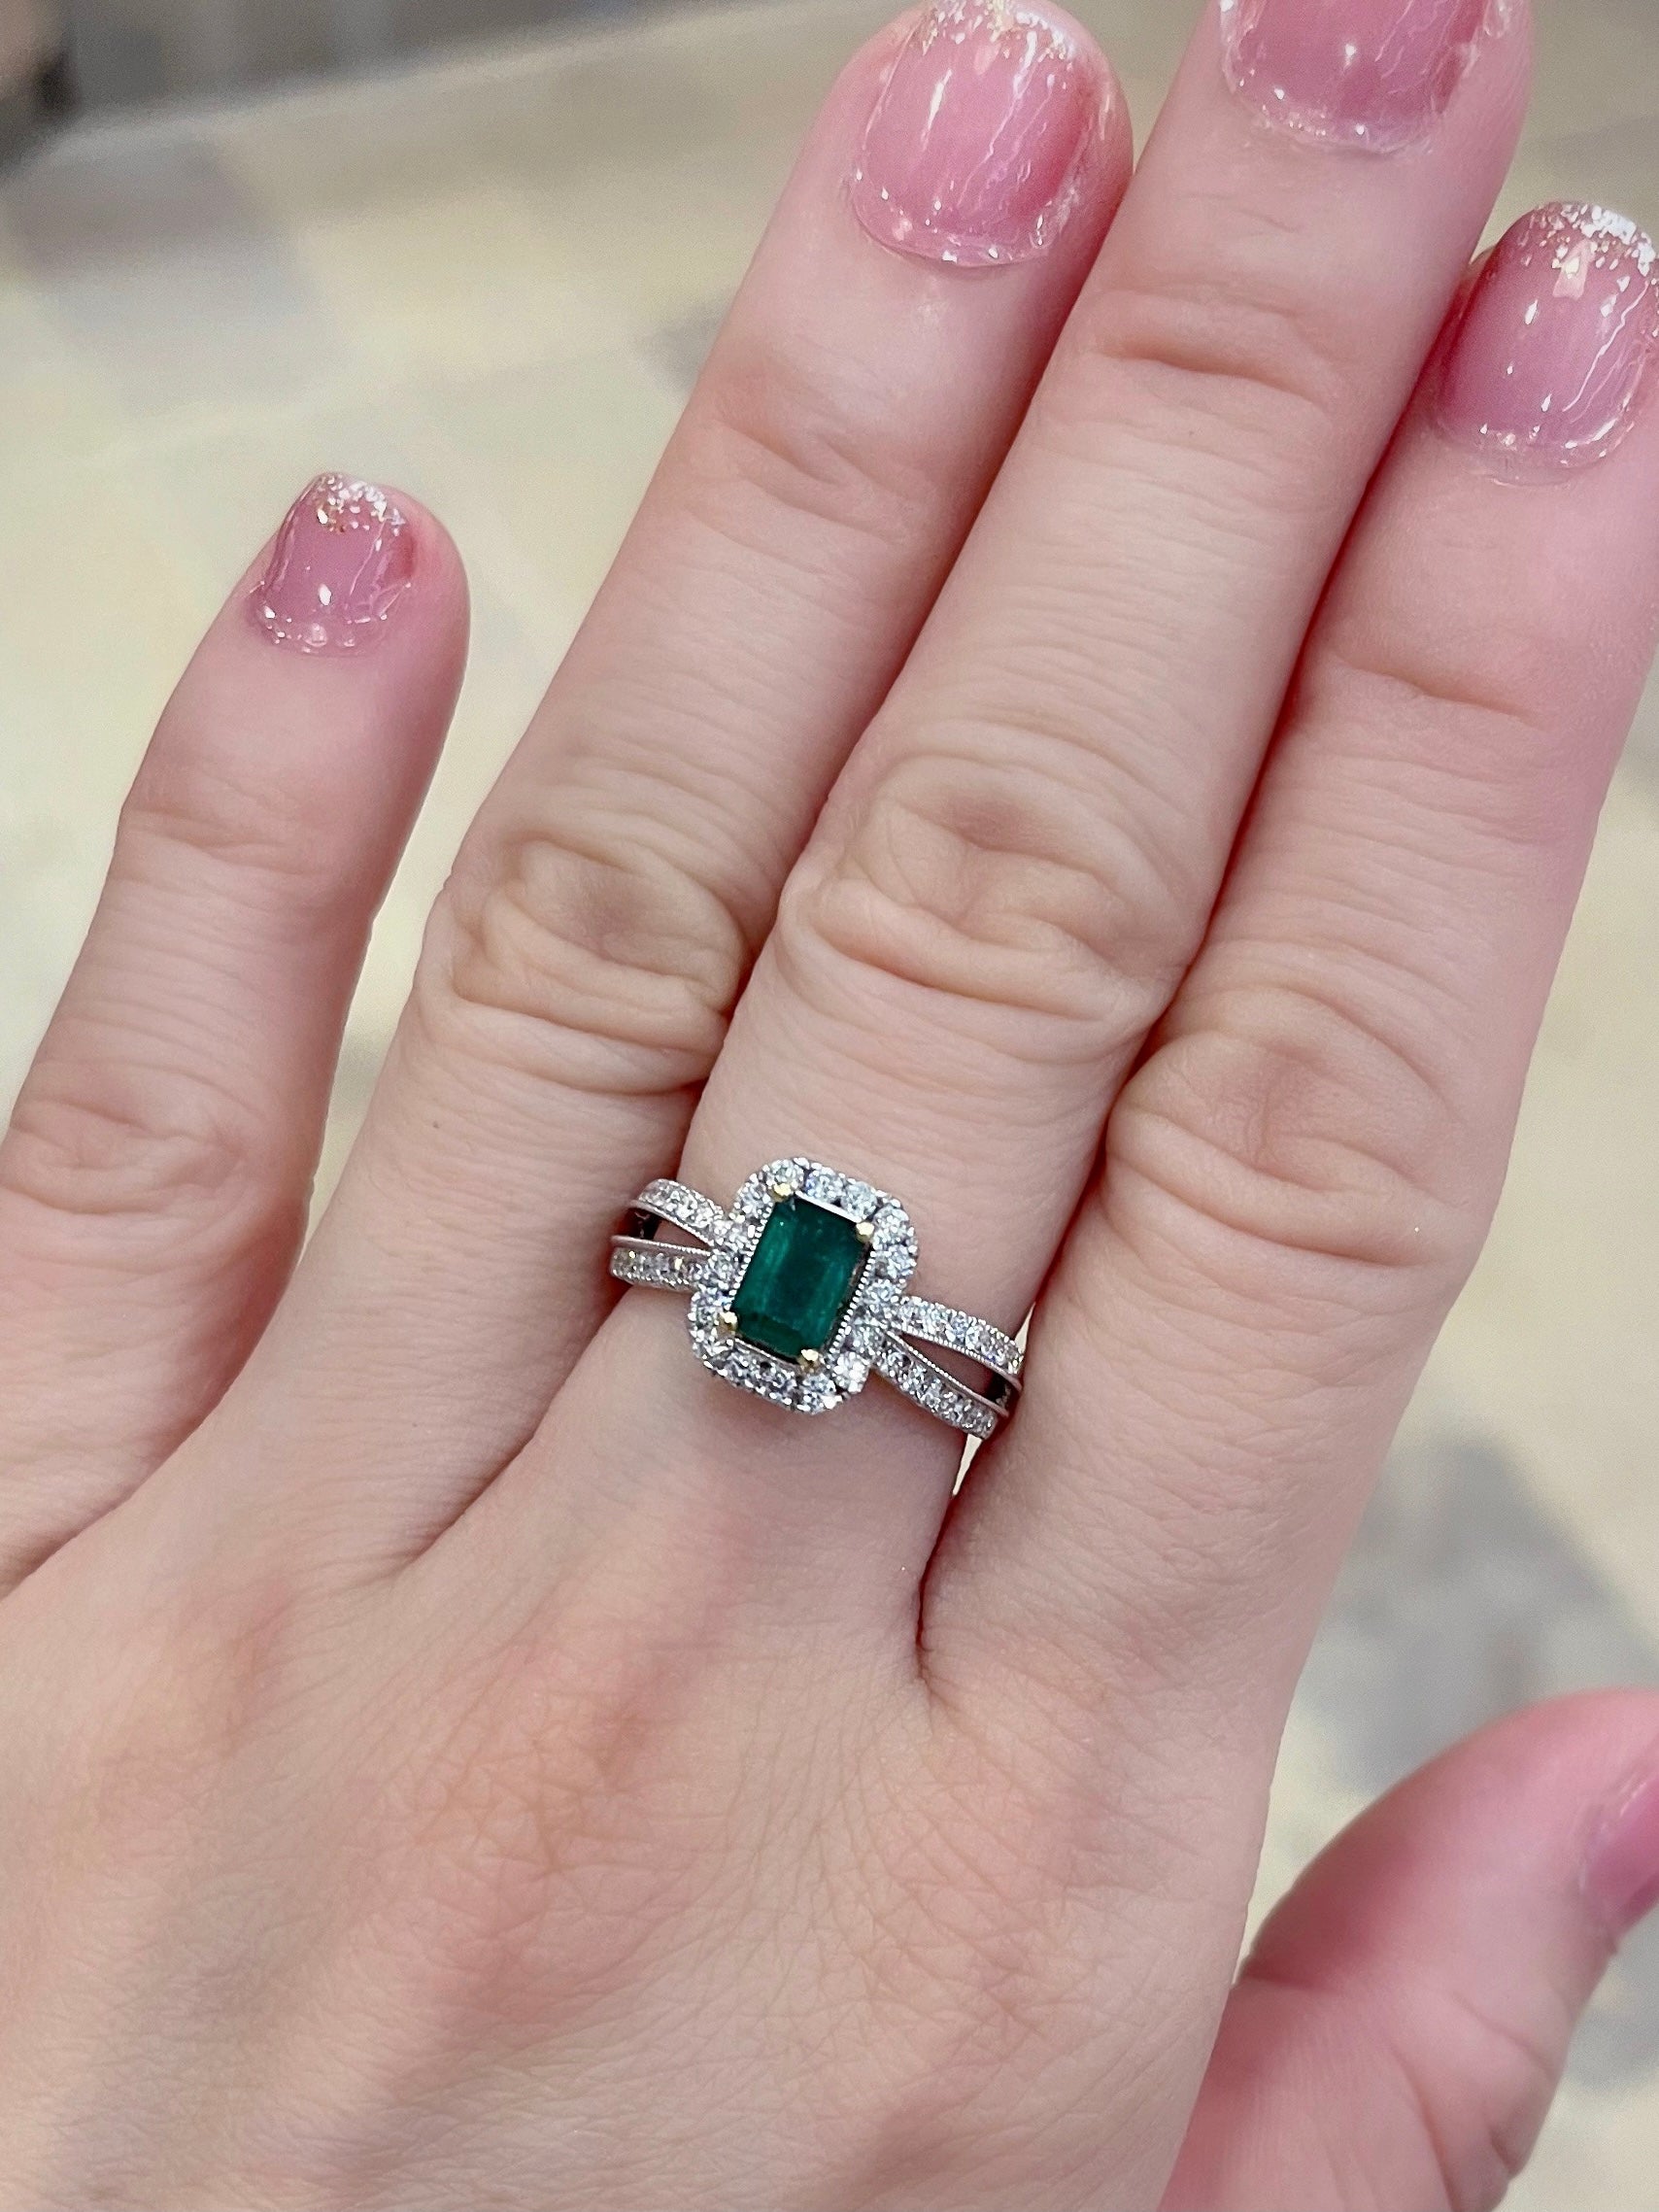 Emerald-Cut Moissanite Halo Engagement Ring in 10k White Gold